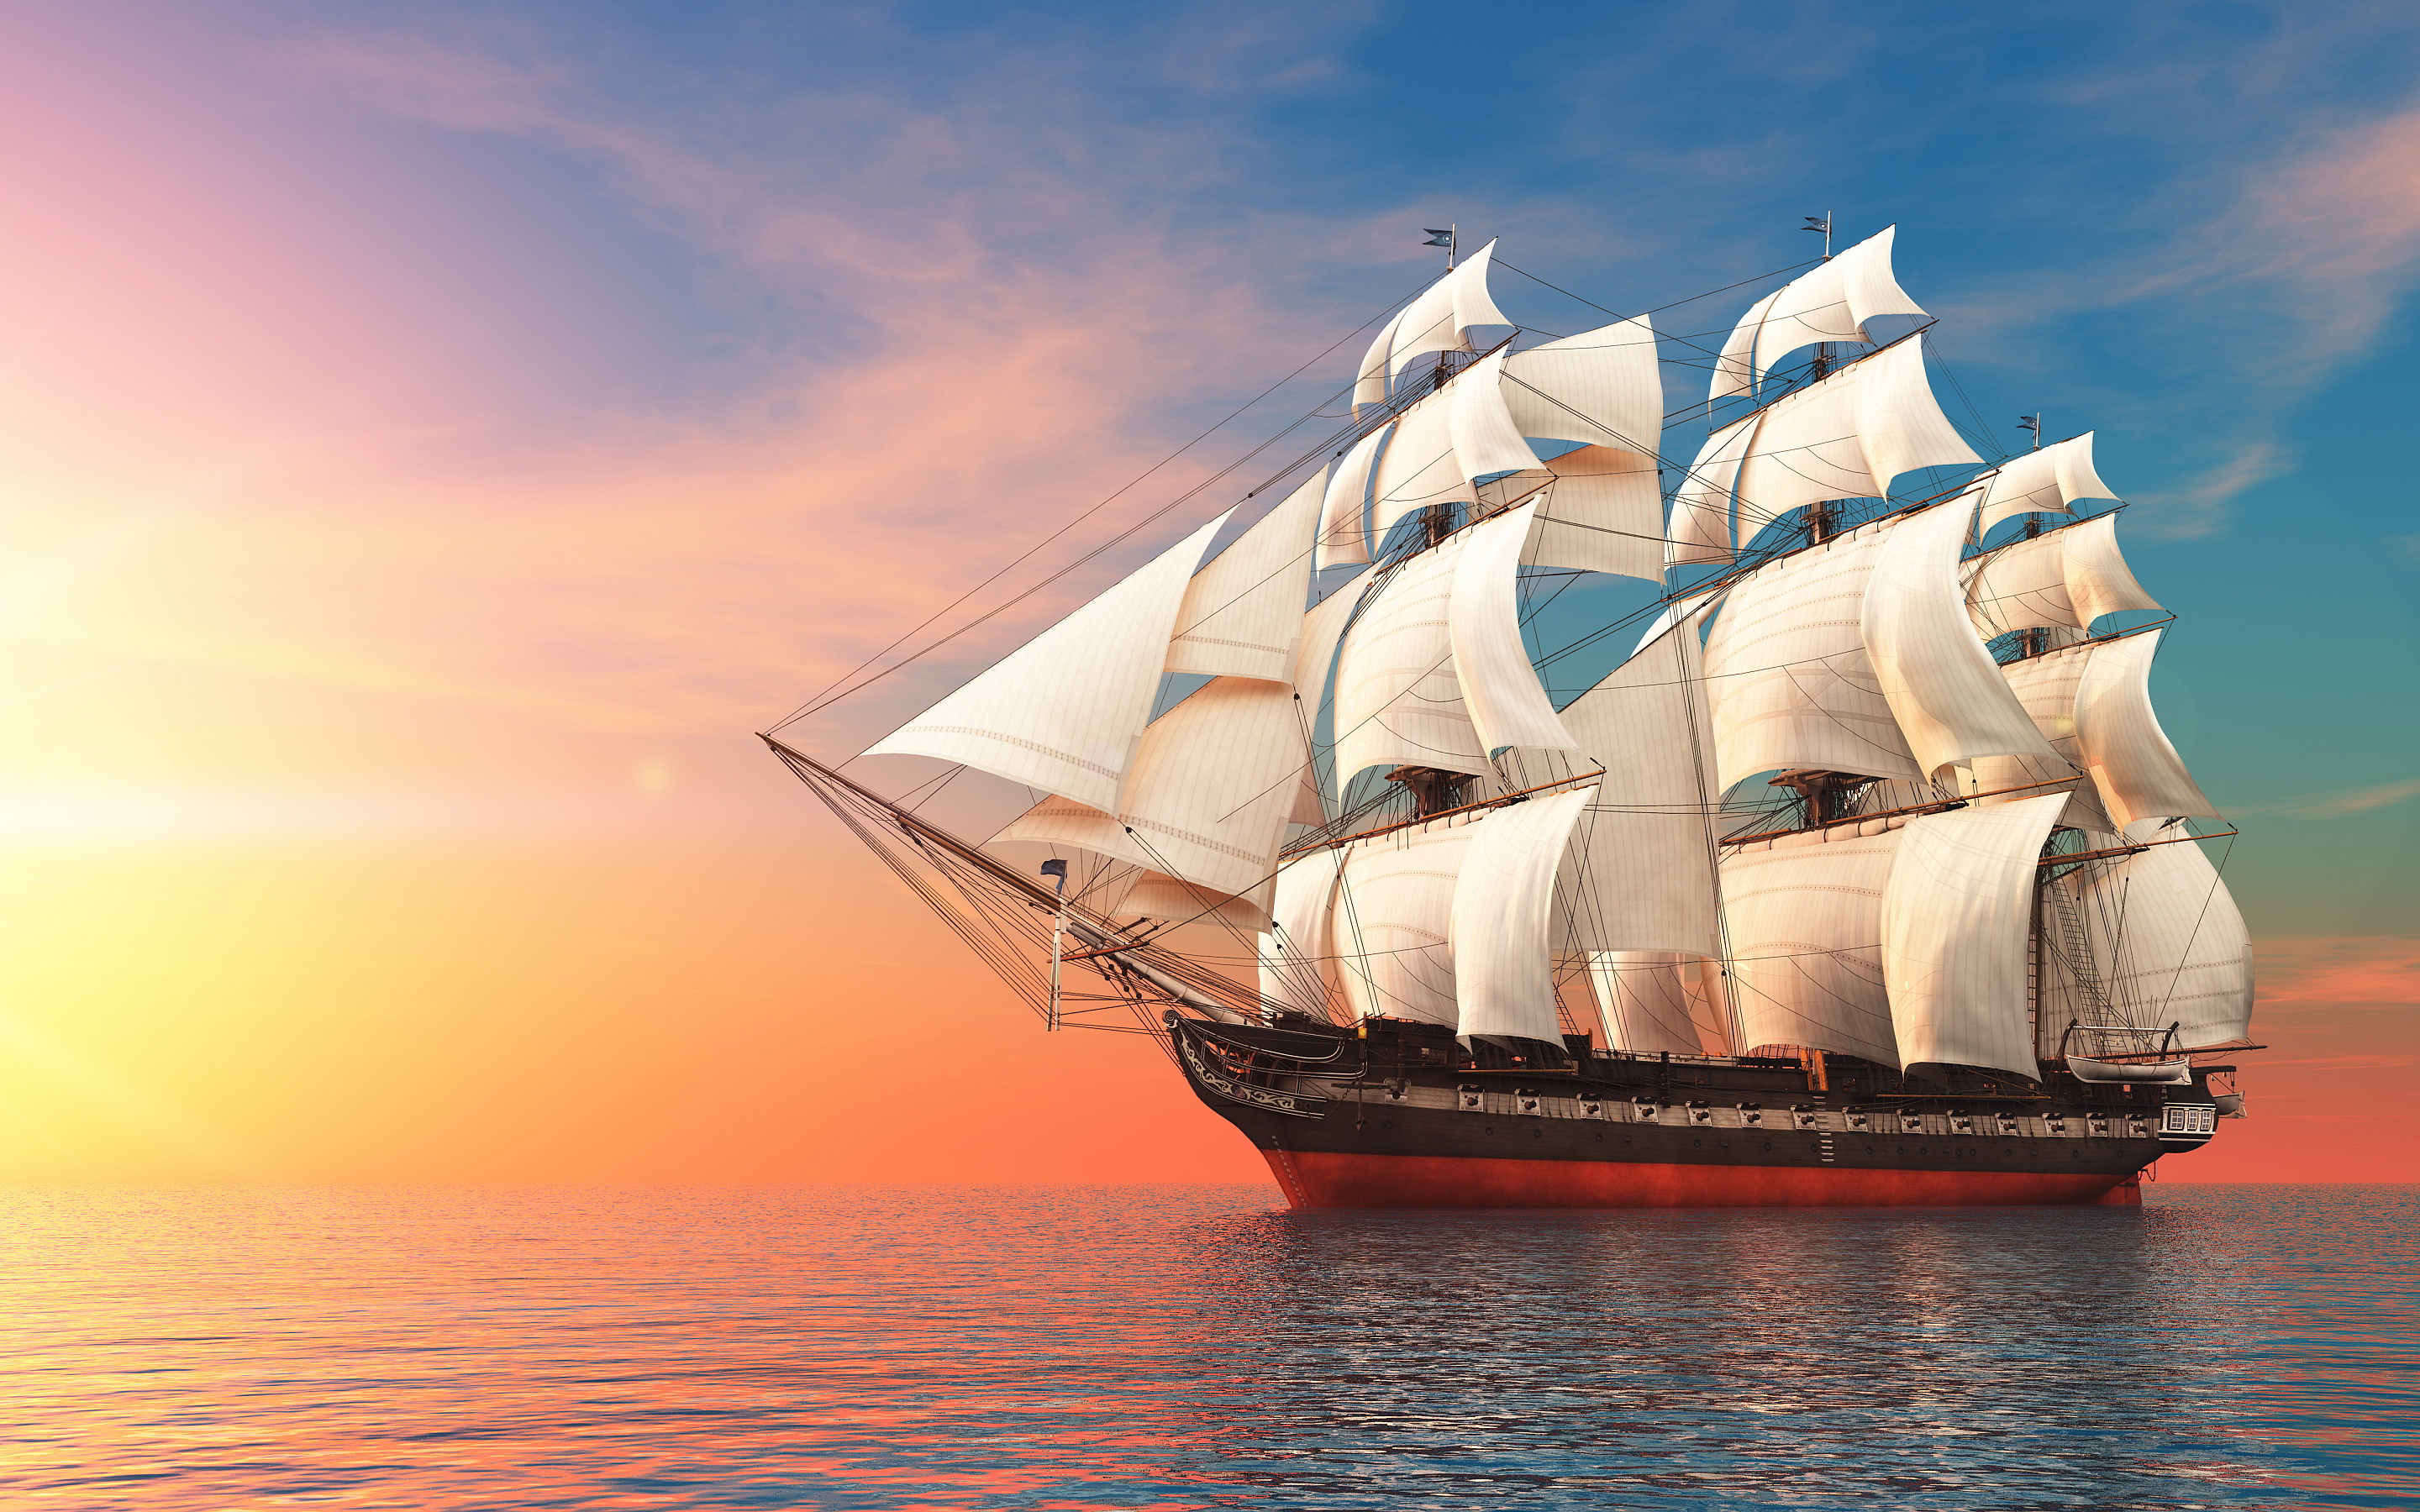 Sailboat Wallpapers 8 - 2880 X 1800 | stmed.net